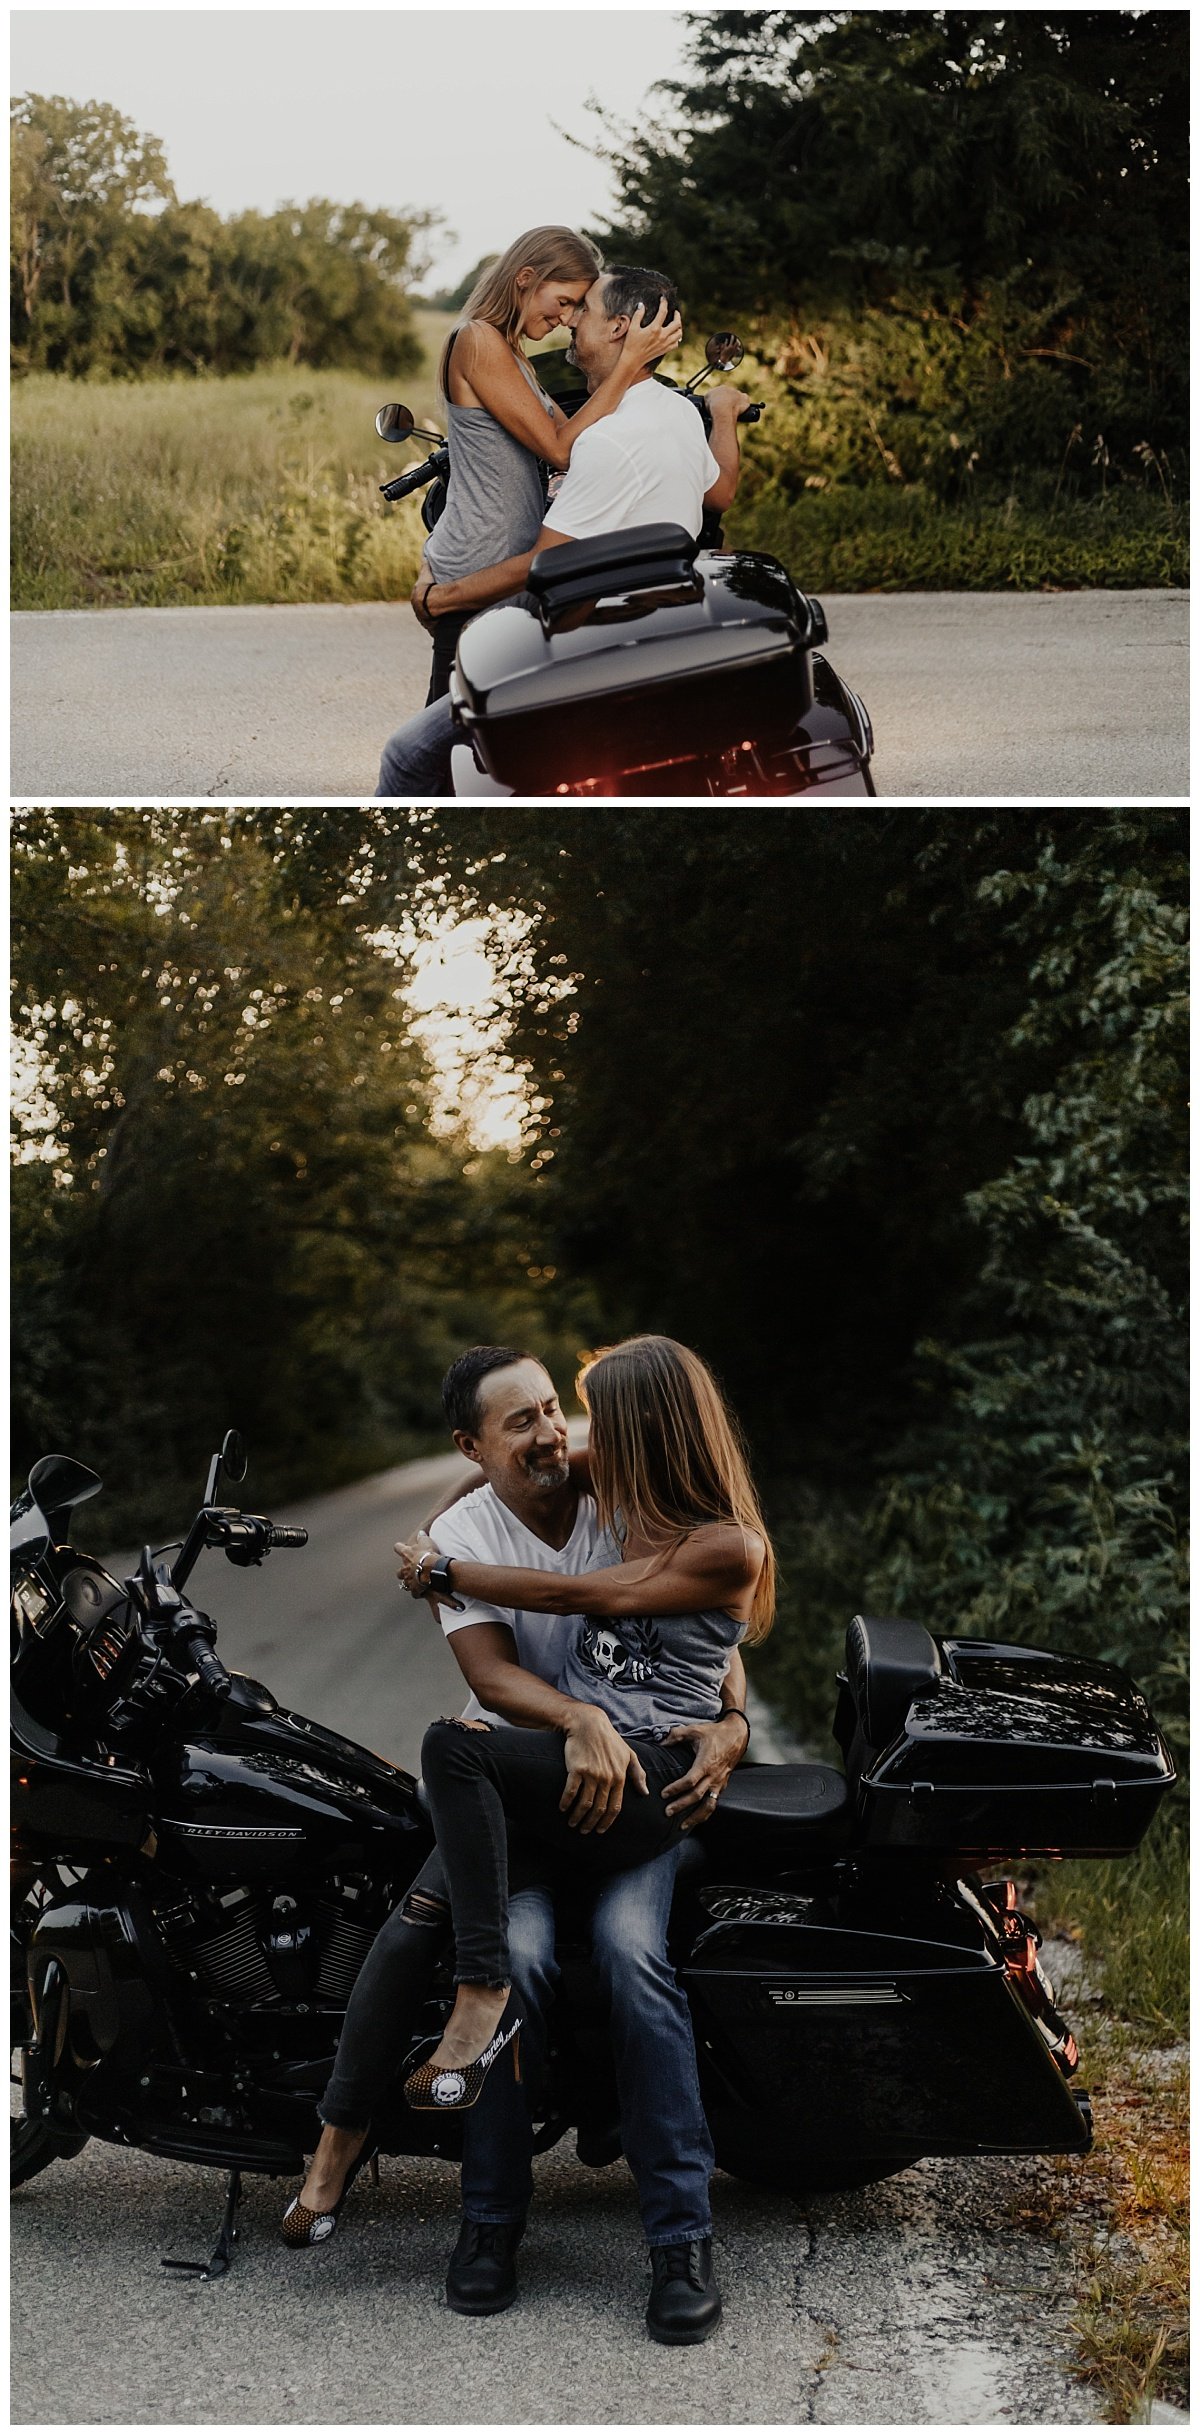 motorcycle+session+_+adventure+session+_+engagement+session+_+motorcycle+photos+_+lana+del+rey+_+ride+or+die+_+adventurous+couple+_+kansas+city+photographer+_+kansas+city+photography (16).jpeg